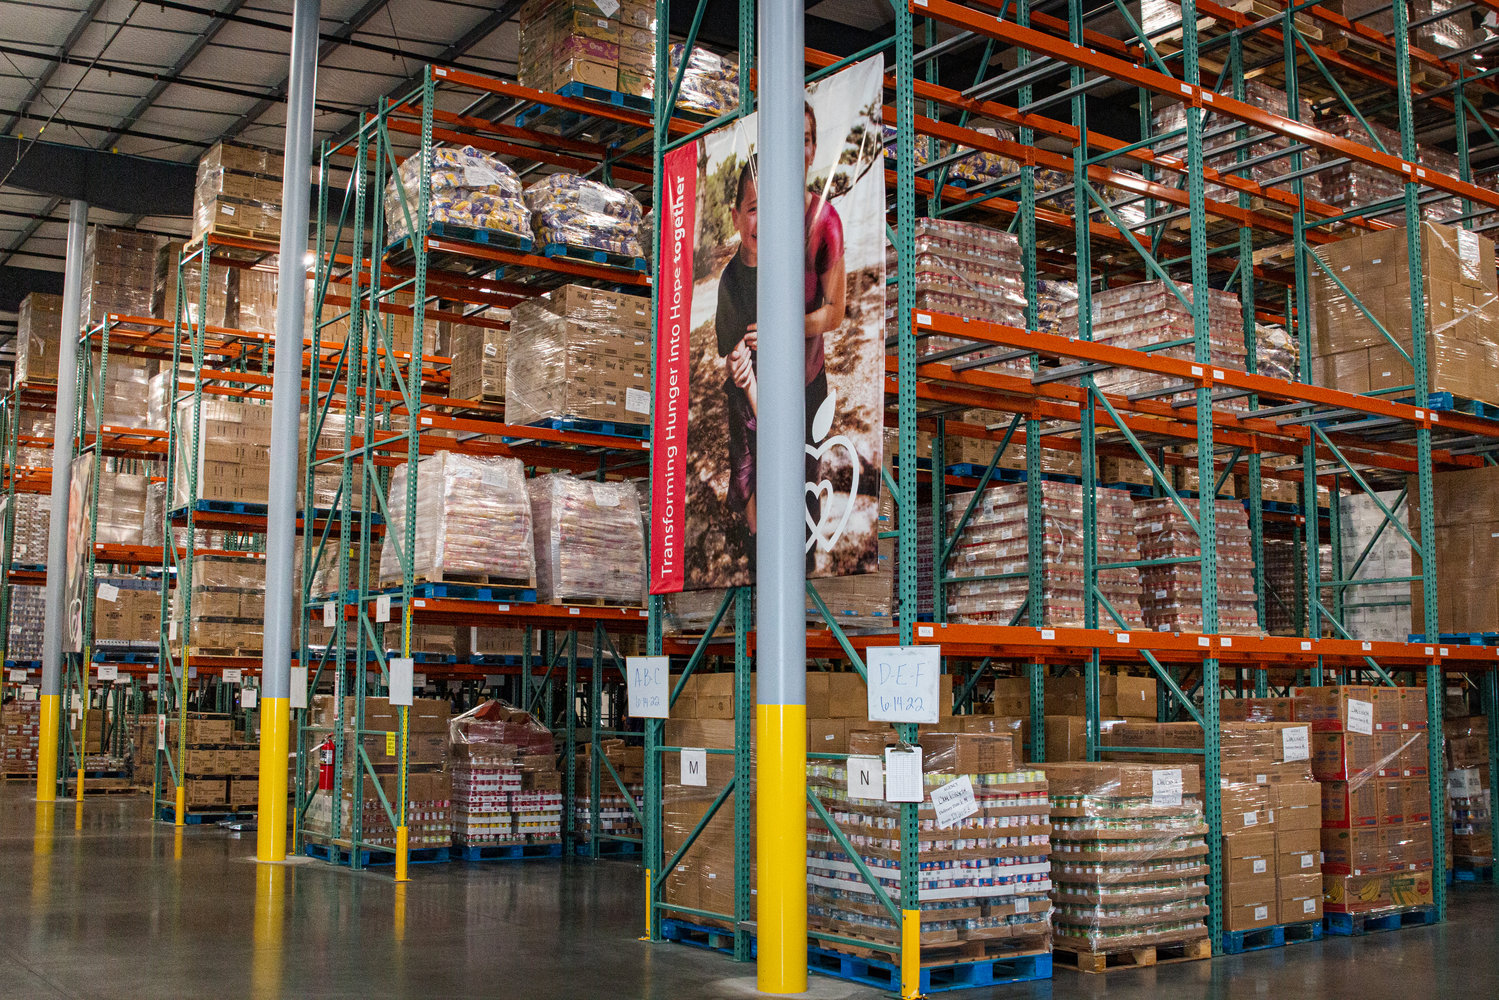 Ozarks Food Harvest has 102,000 square feet of warehouse space.